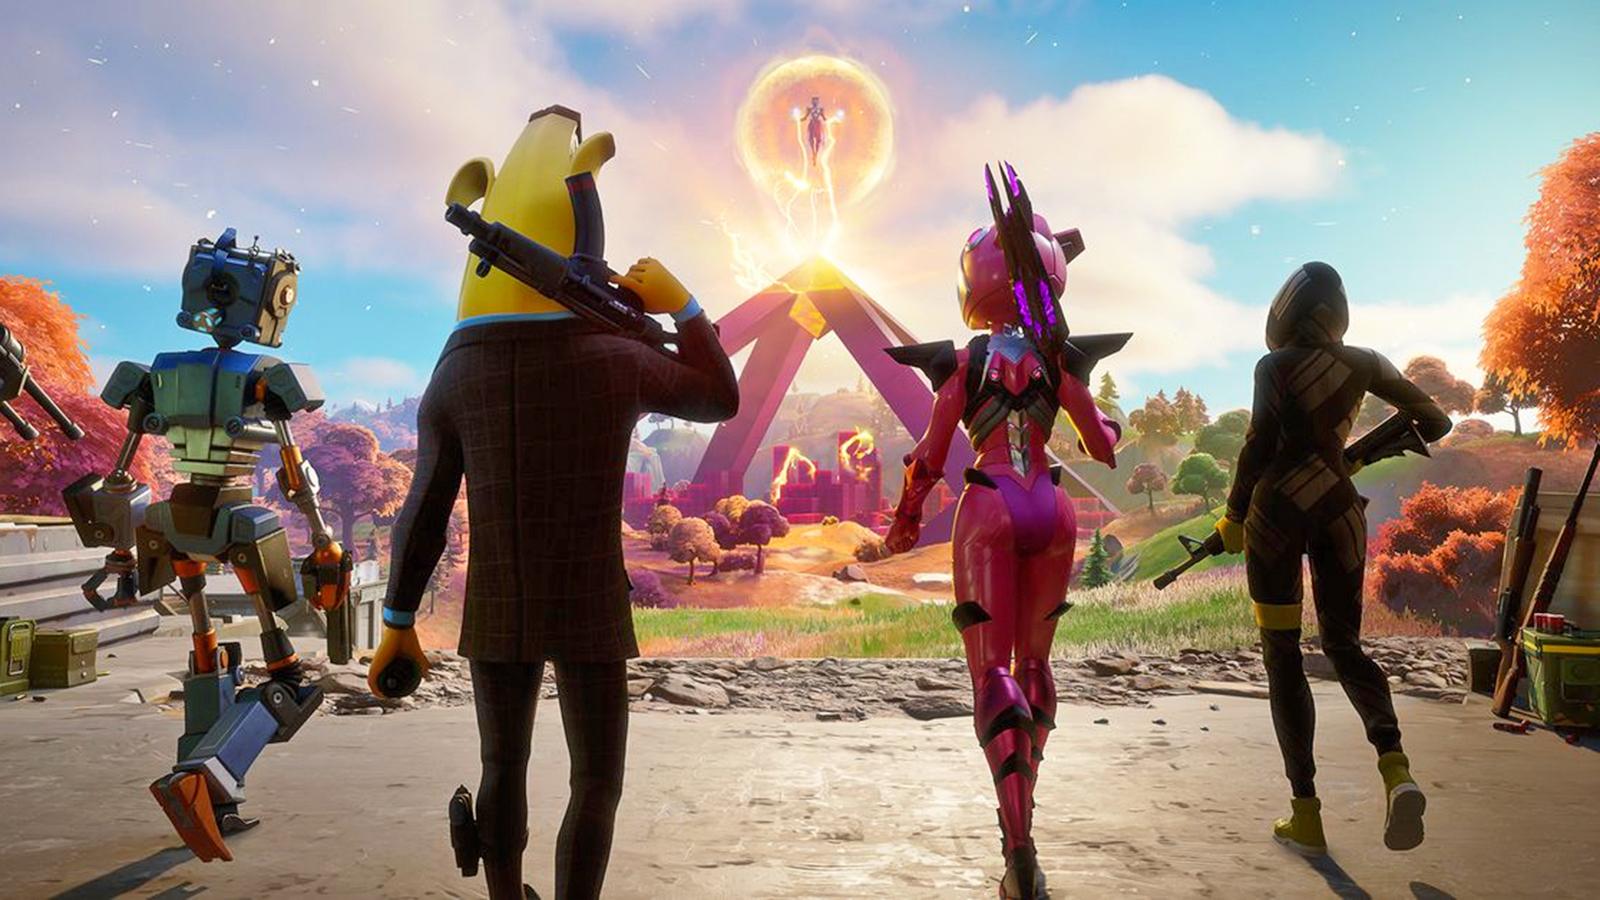 Players walking towards the Cube Queen in Fortnite as the Chapter 3 trailer leaks